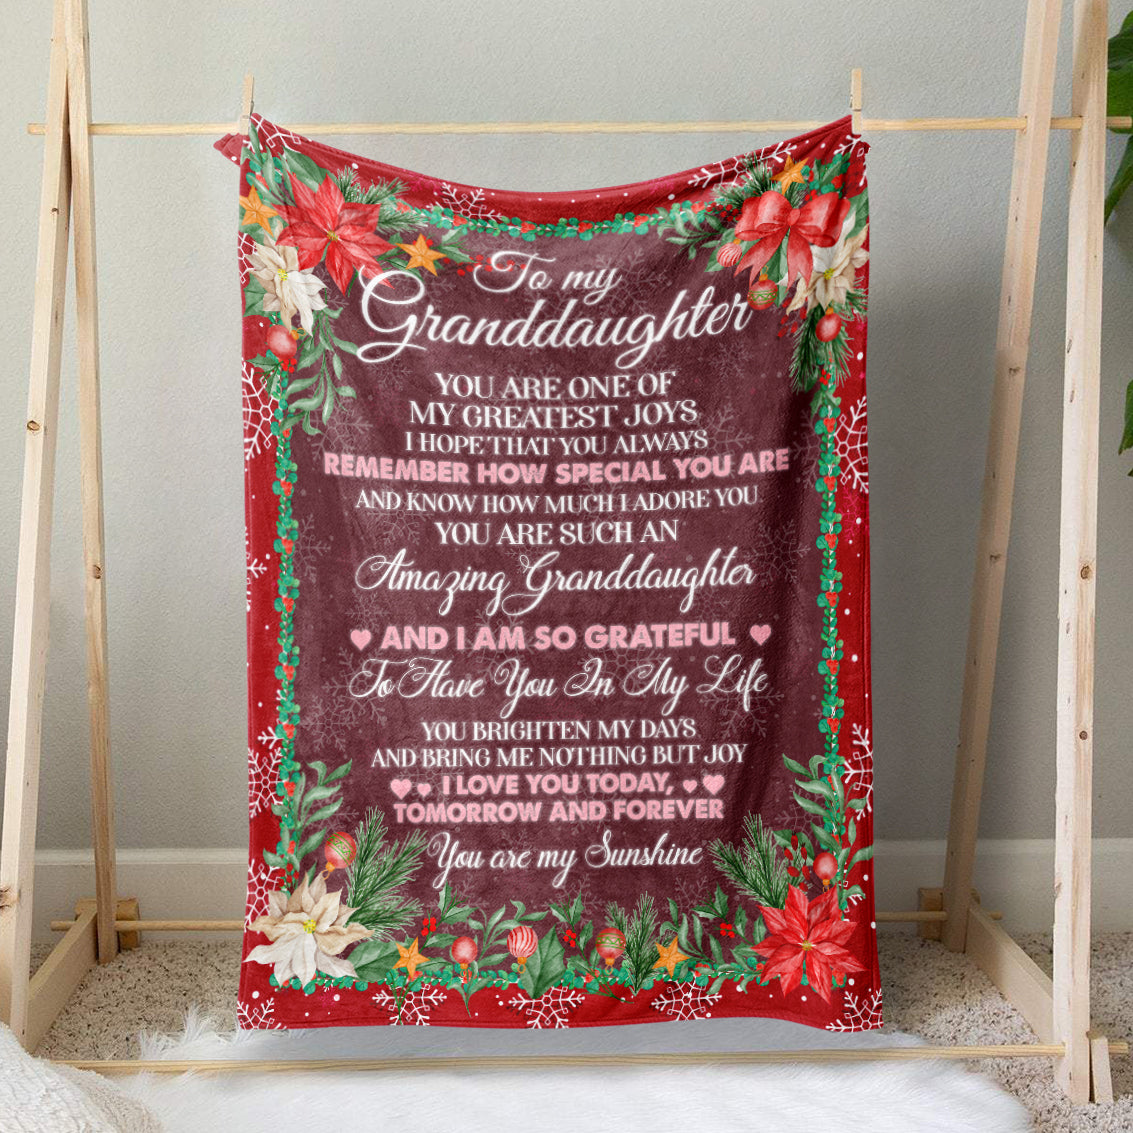 To My Granddaughter Christmas Blanket, You Are My Greatest Joy, Love You Today Tomorrow Forever Blanket from Grandma, Christmas Gift for Granddaughter